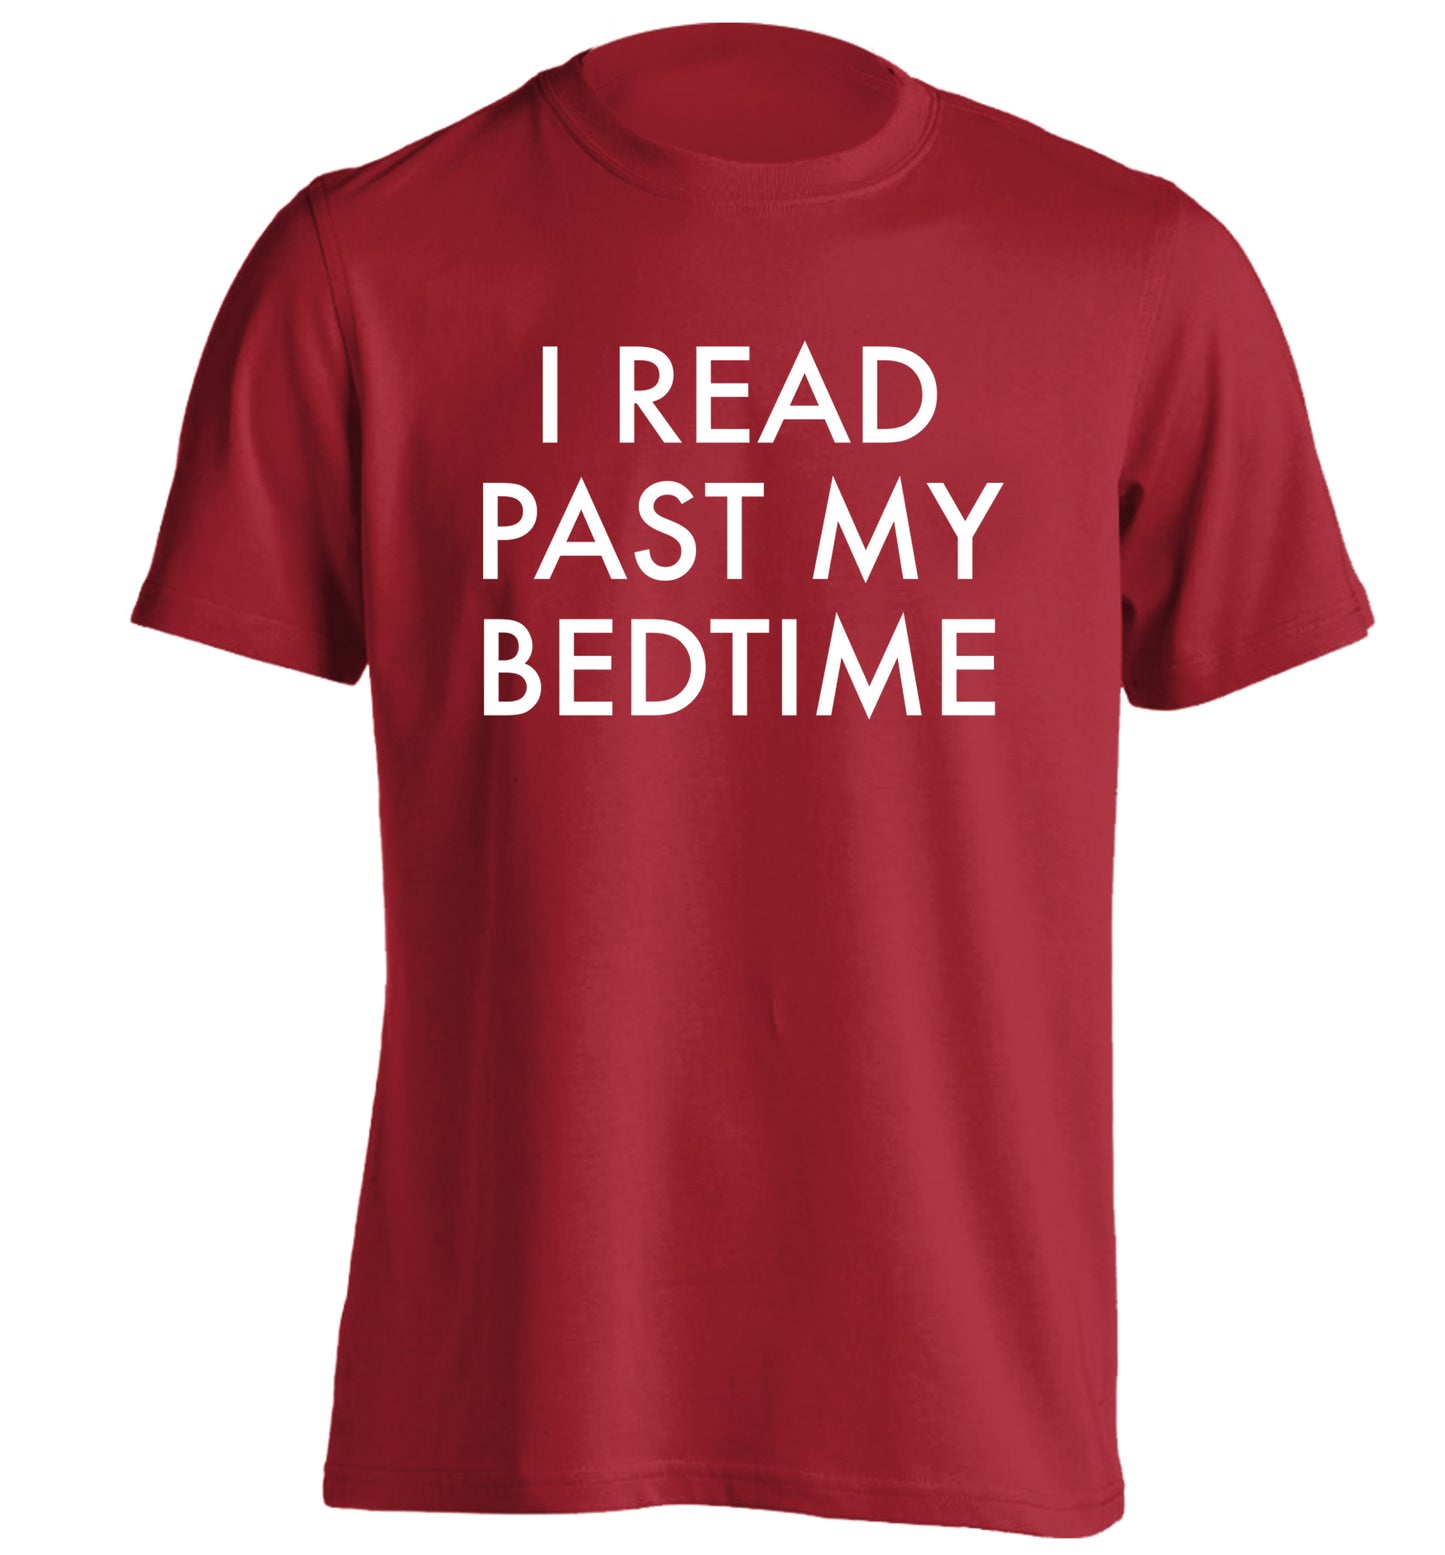 I read past my bedtime adults unisex red Tshirt 2XL